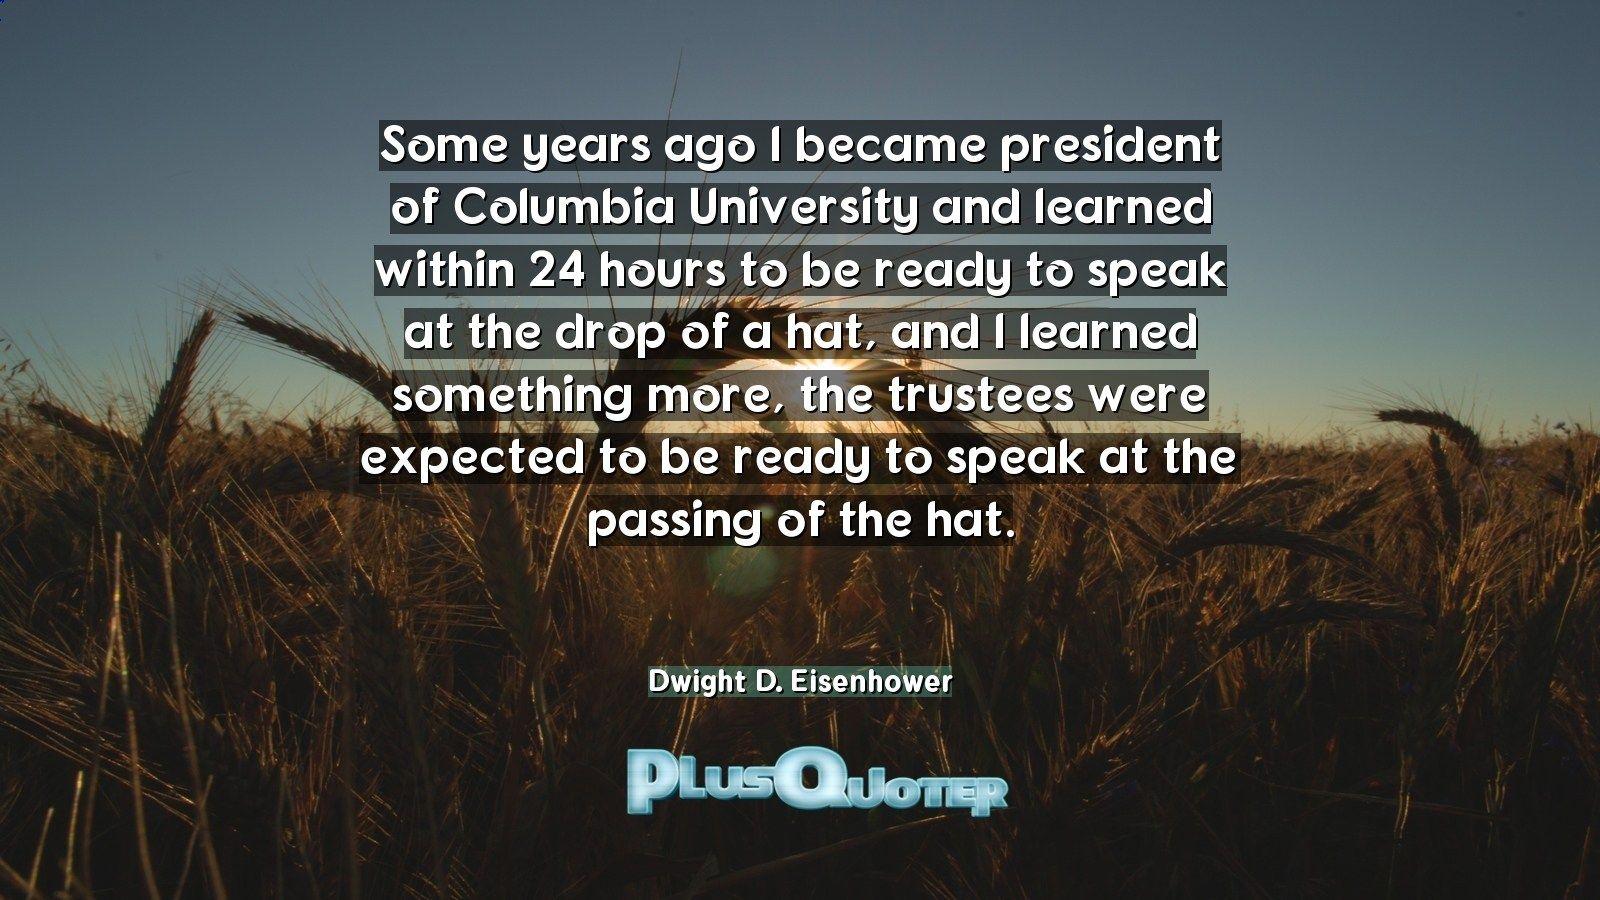 Some years ago I became president of Columbia University and learned